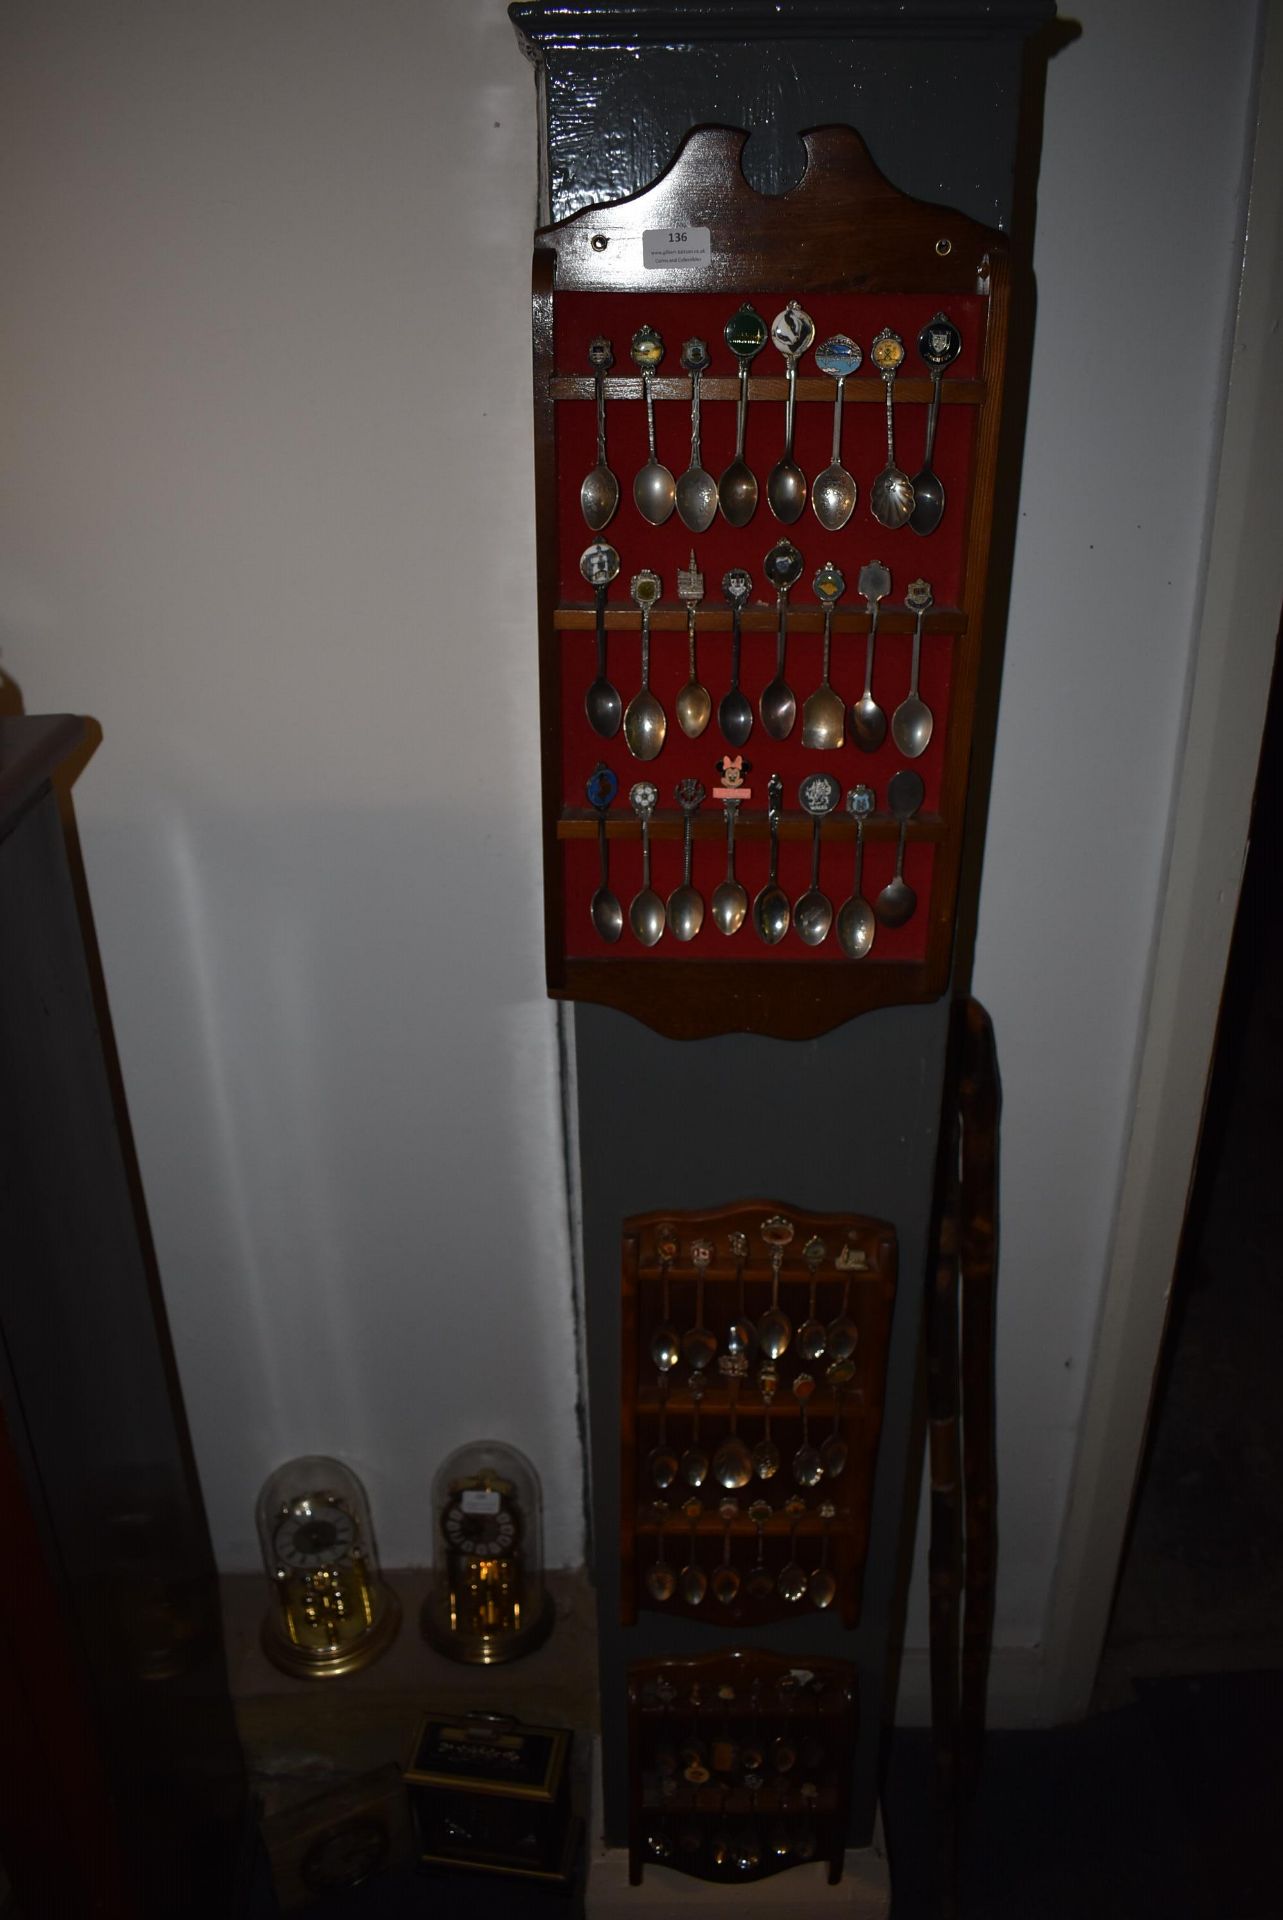 Quantity of Collectible Spoons in Display Shelves